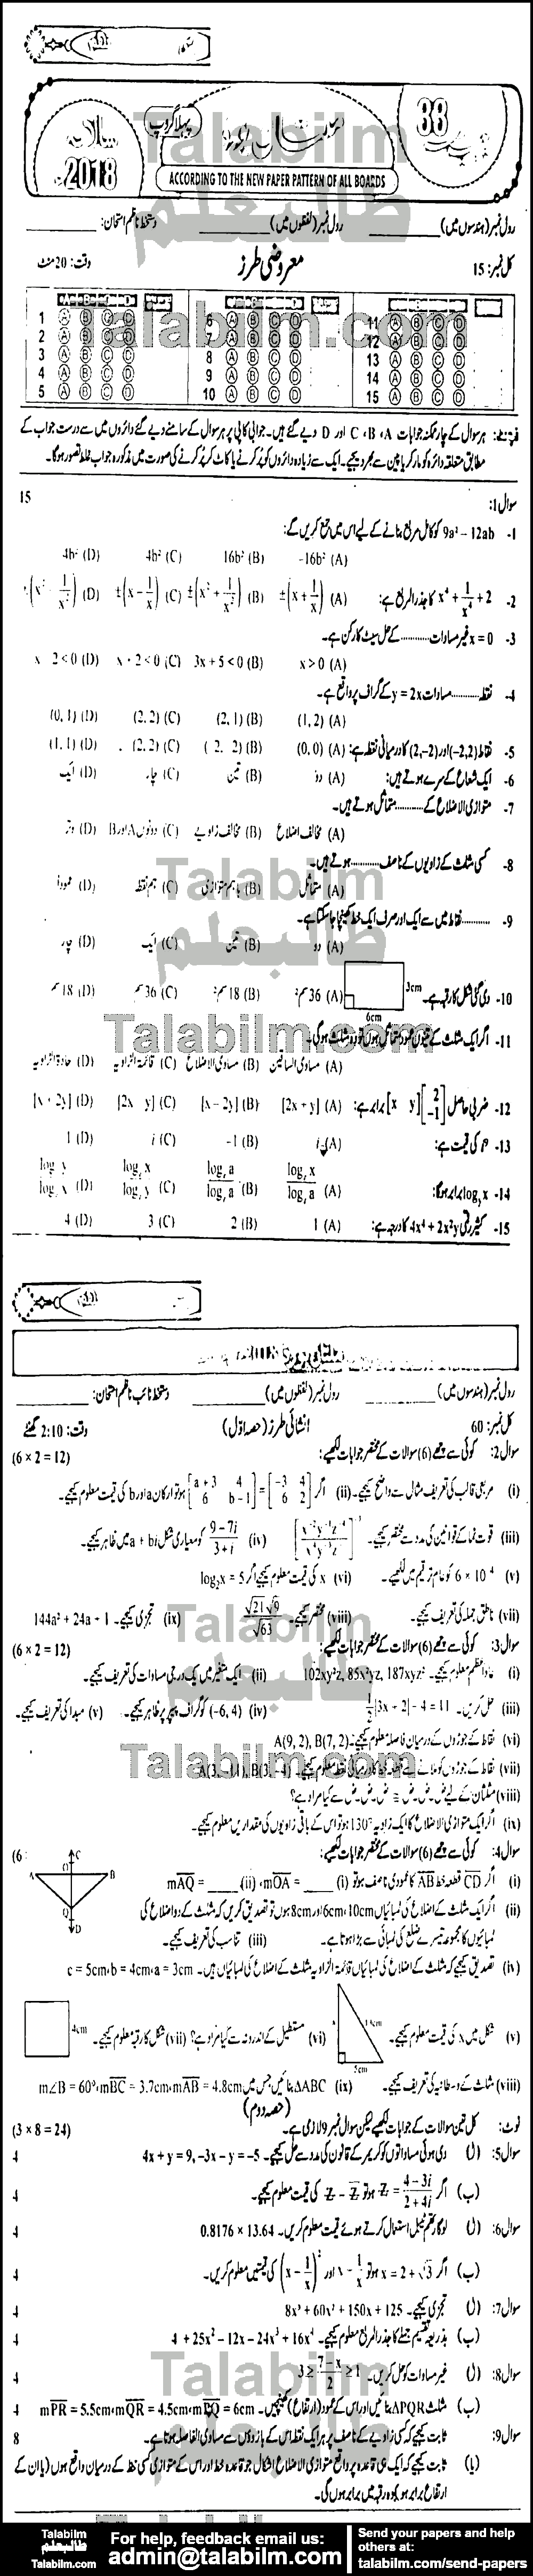 Math 0 past paper for 2018 Group-I